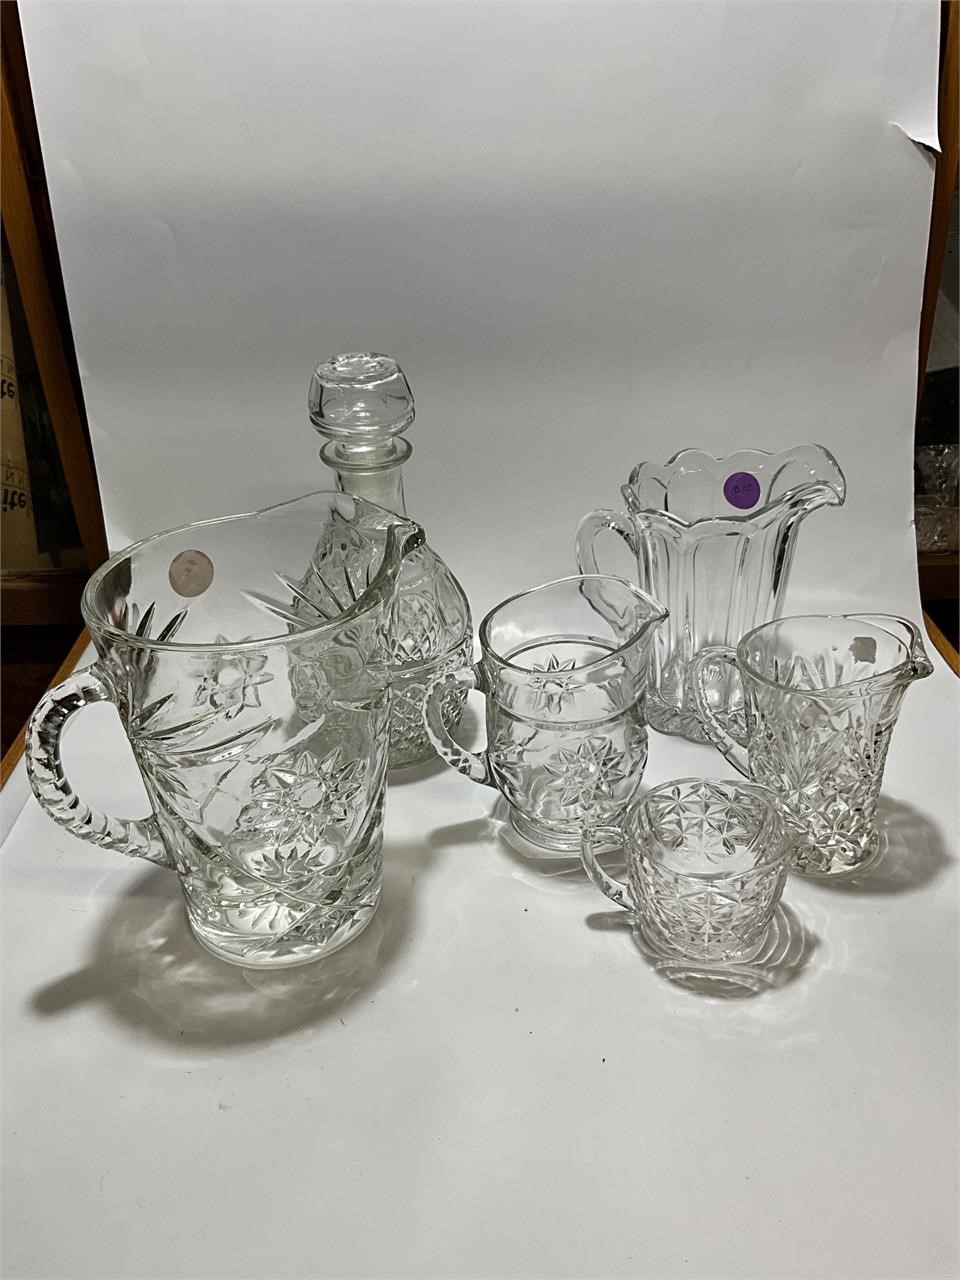 Group of pitchers and a decanter